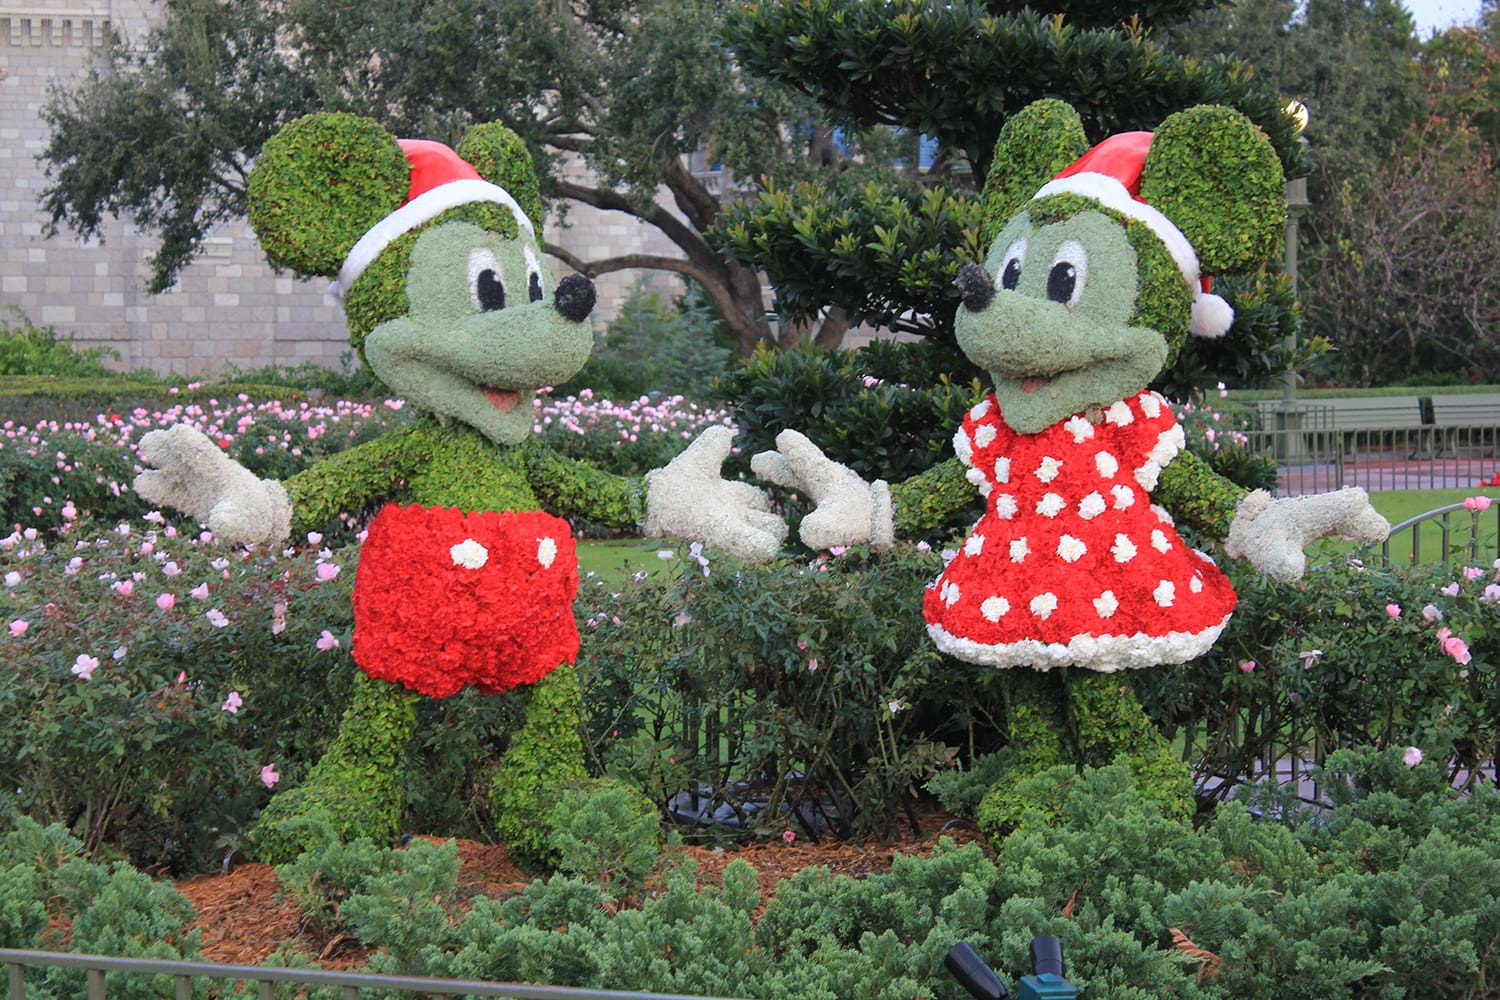 Hedge sculptures of Mickey and Minnie